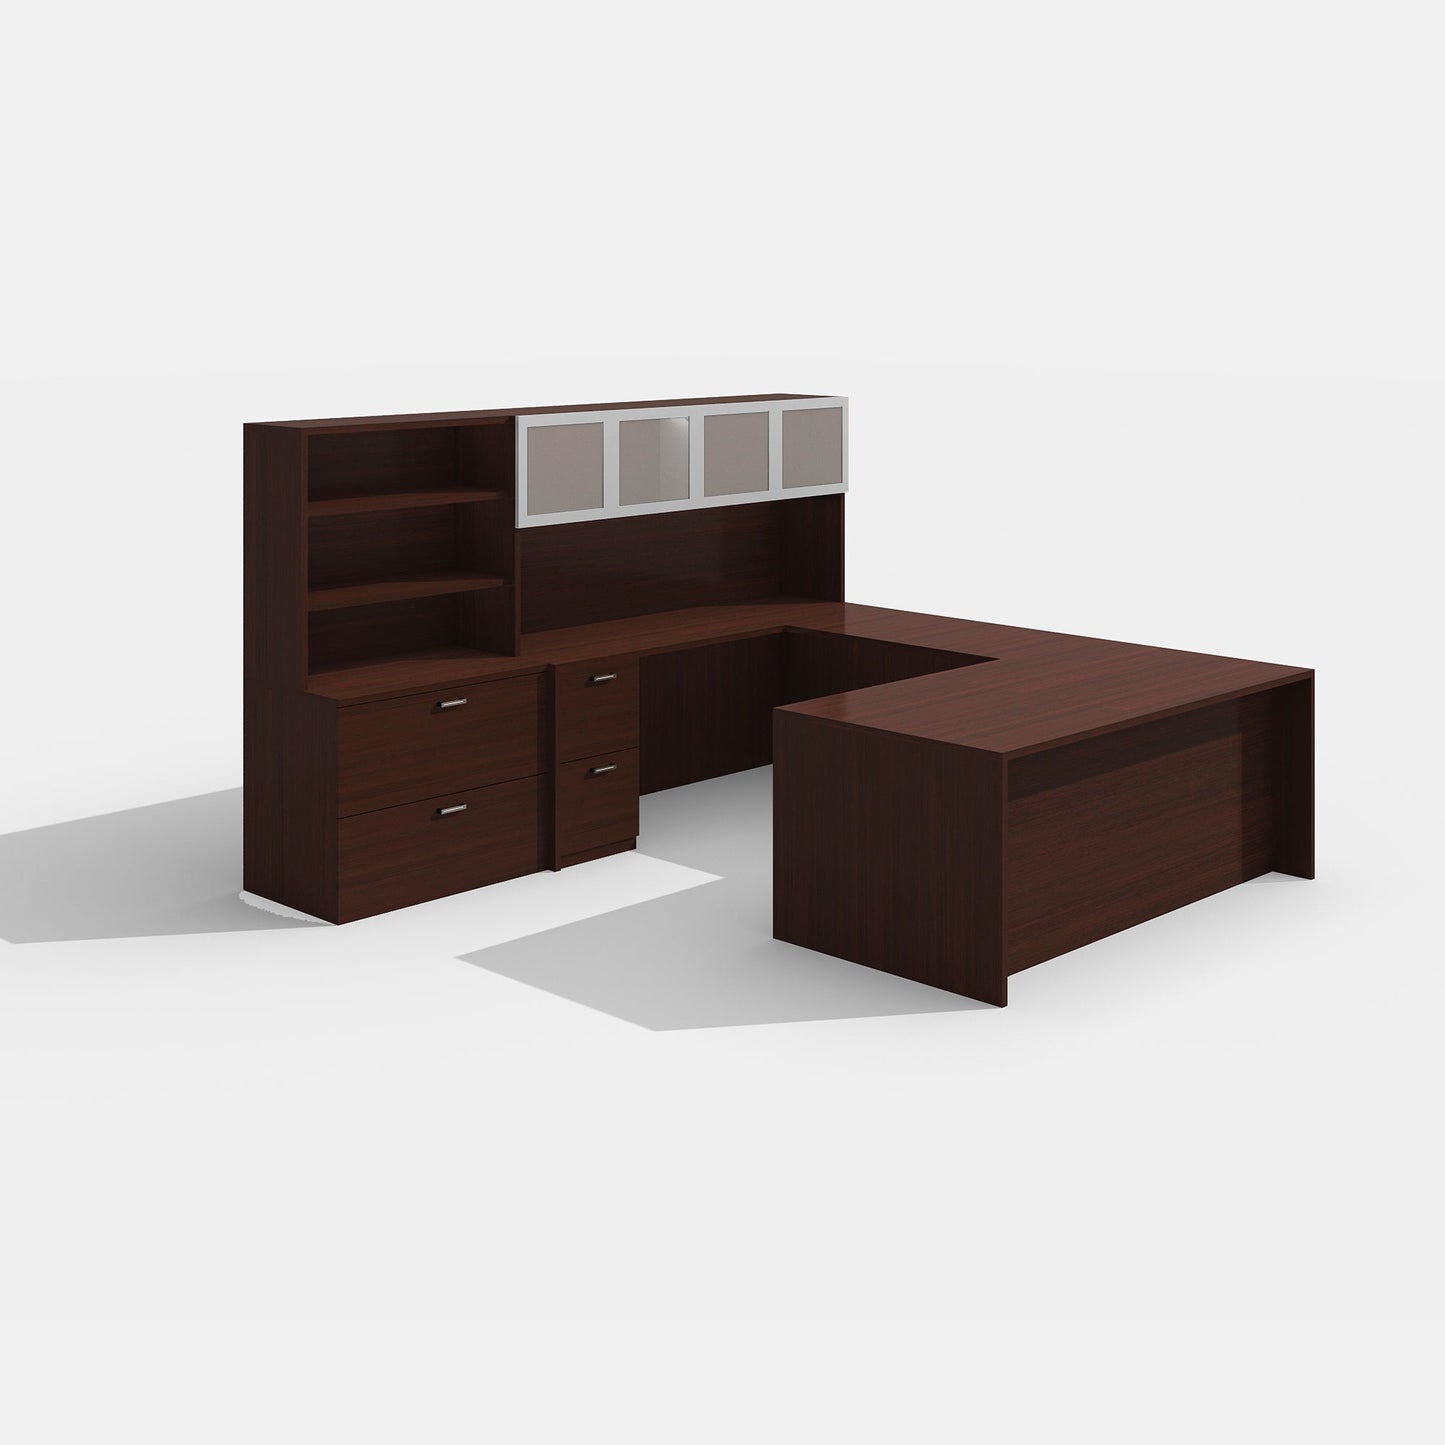 Amber U Shaped Executive Office Desk Package by Cherryman Industries - Wholesale Office Furniture